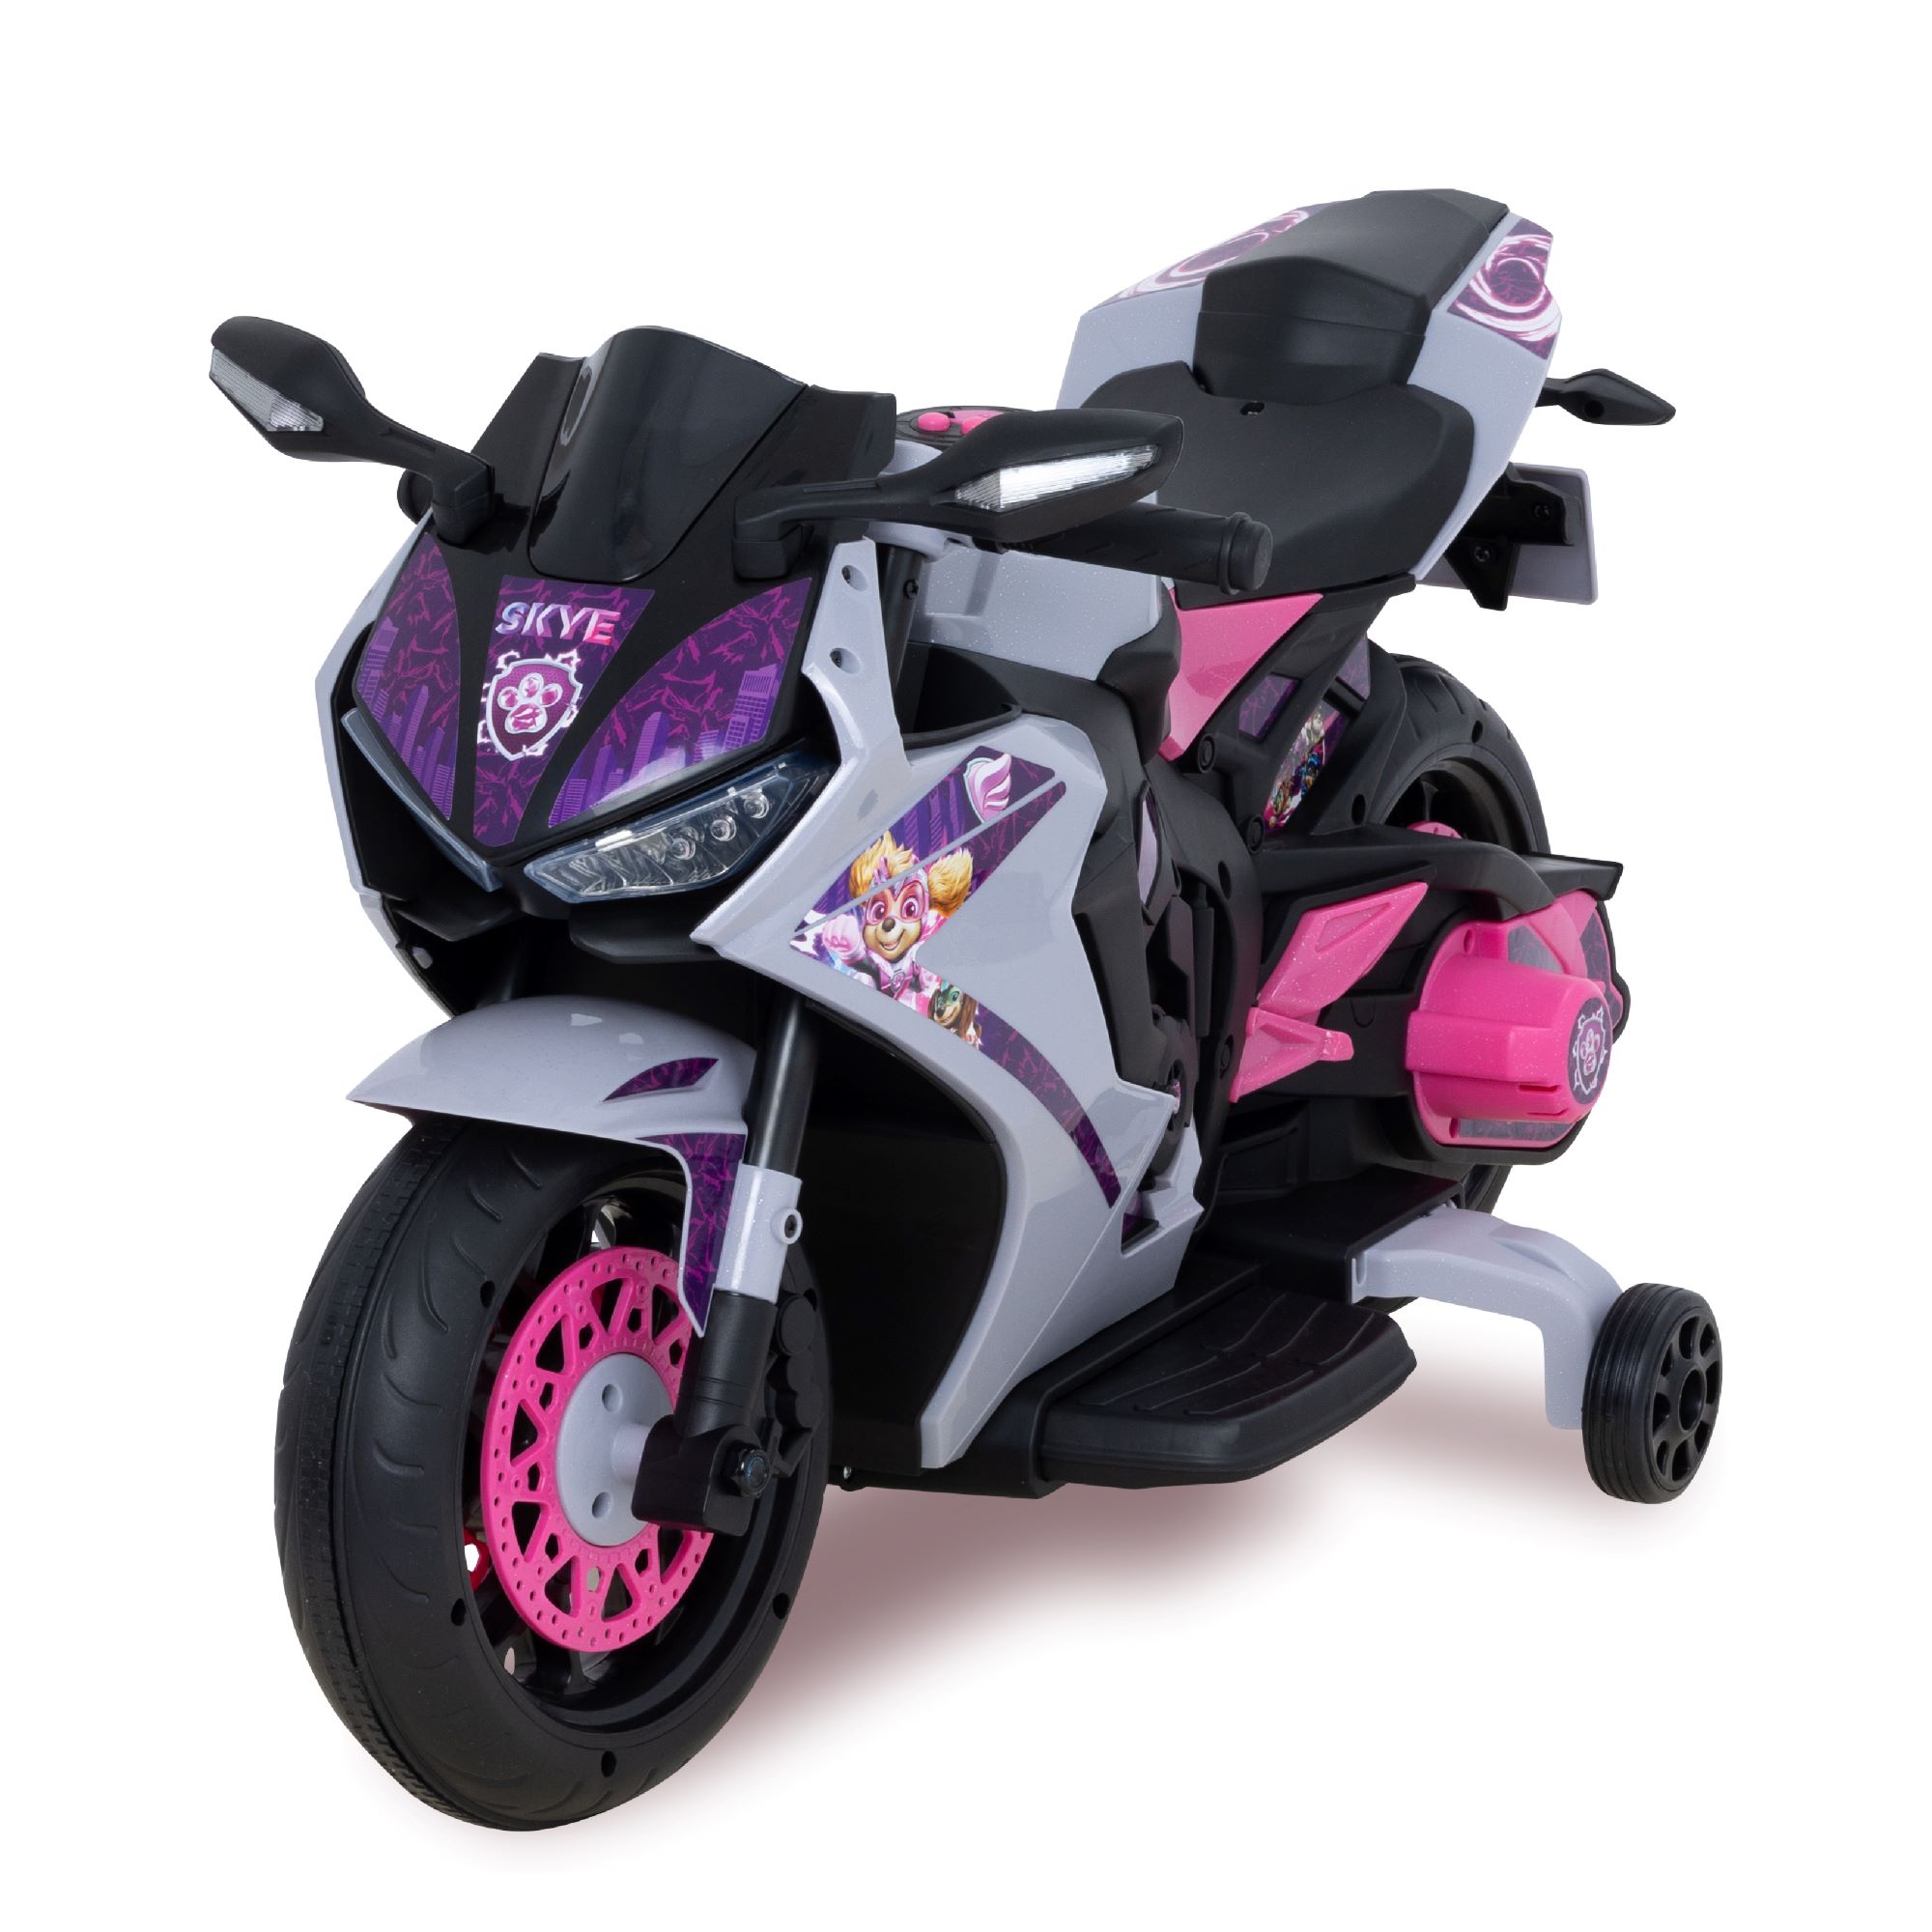 Paw Patrol SKYE, 6 Volts Motorcycle Ride on, For Kids, Ages 3+ Years, up to 65lbs - image 1 of 8